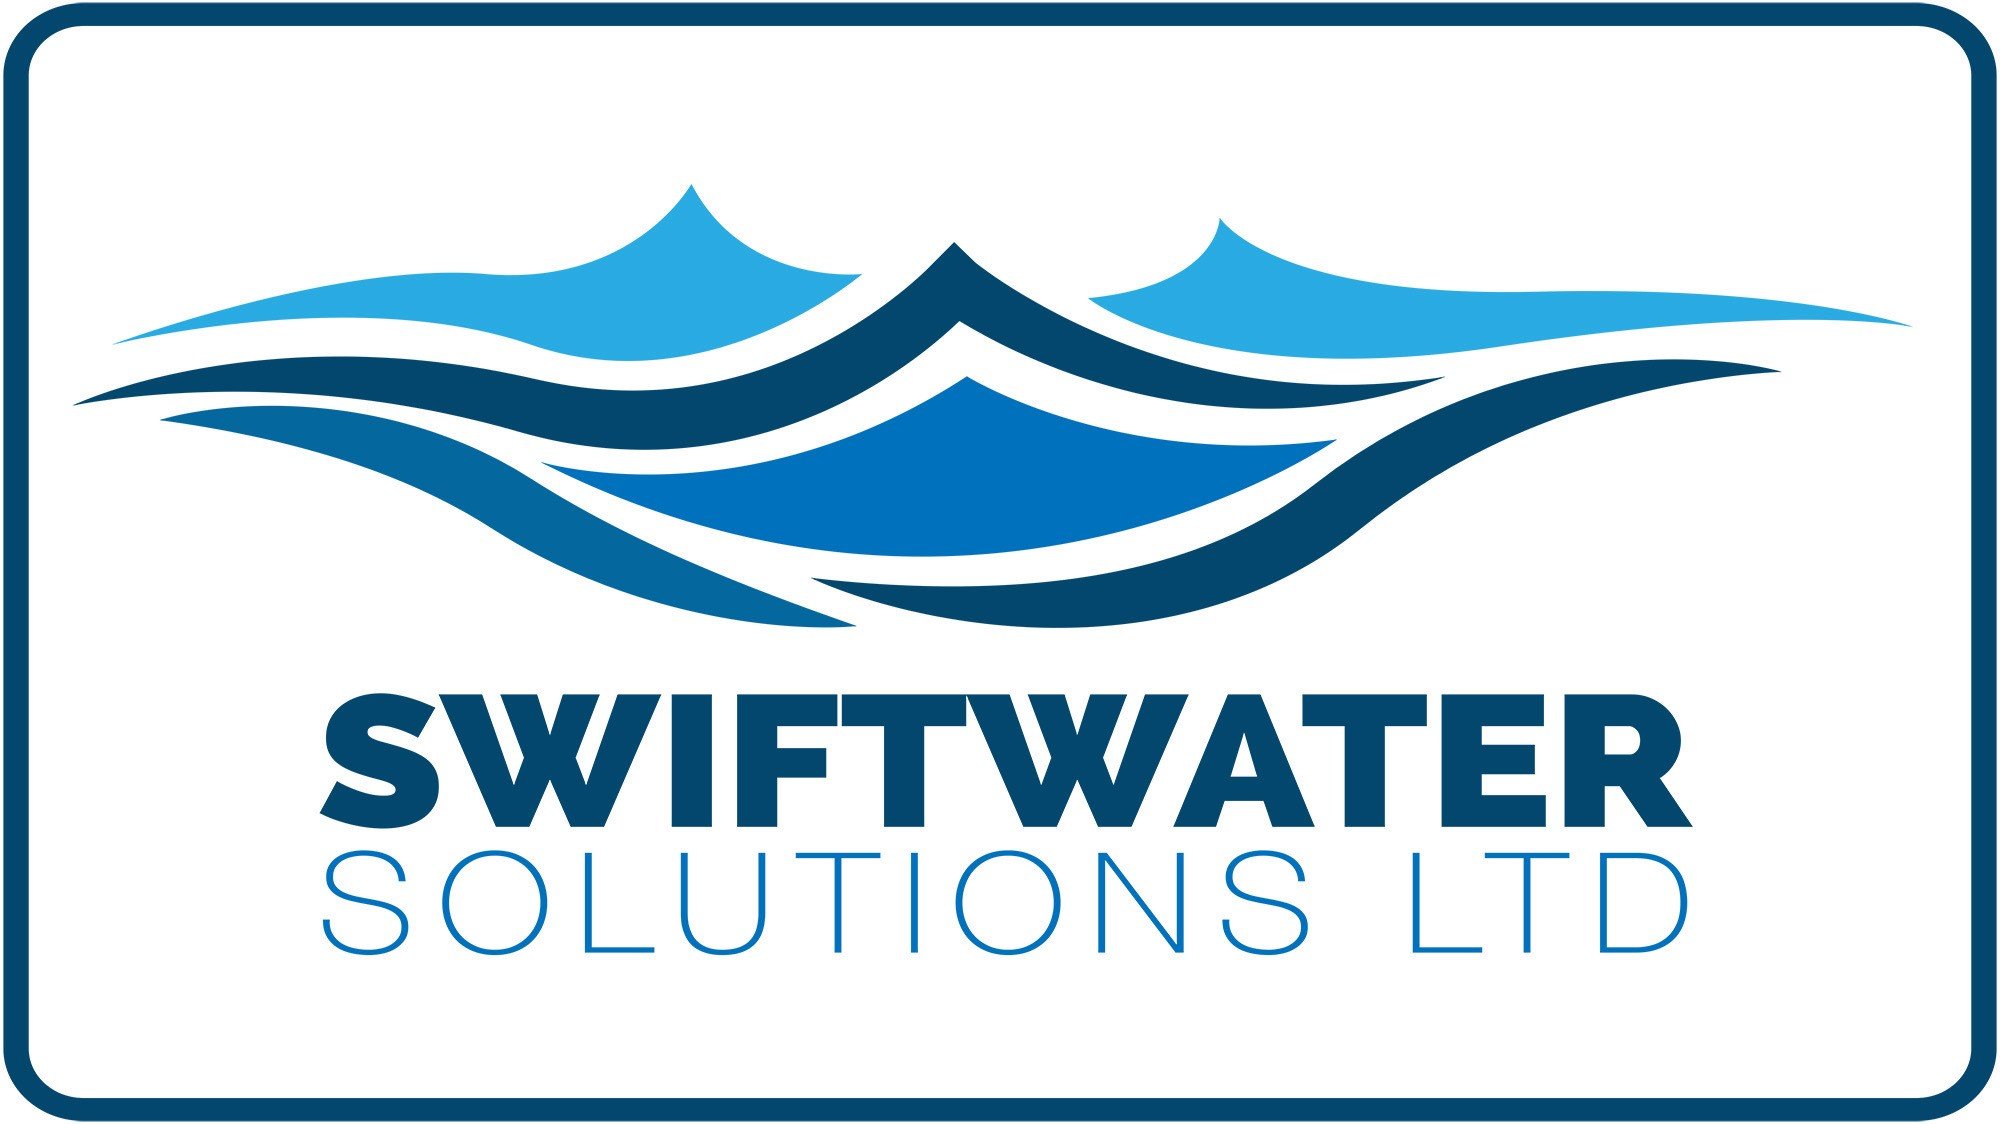 Swiftwater solutions logo